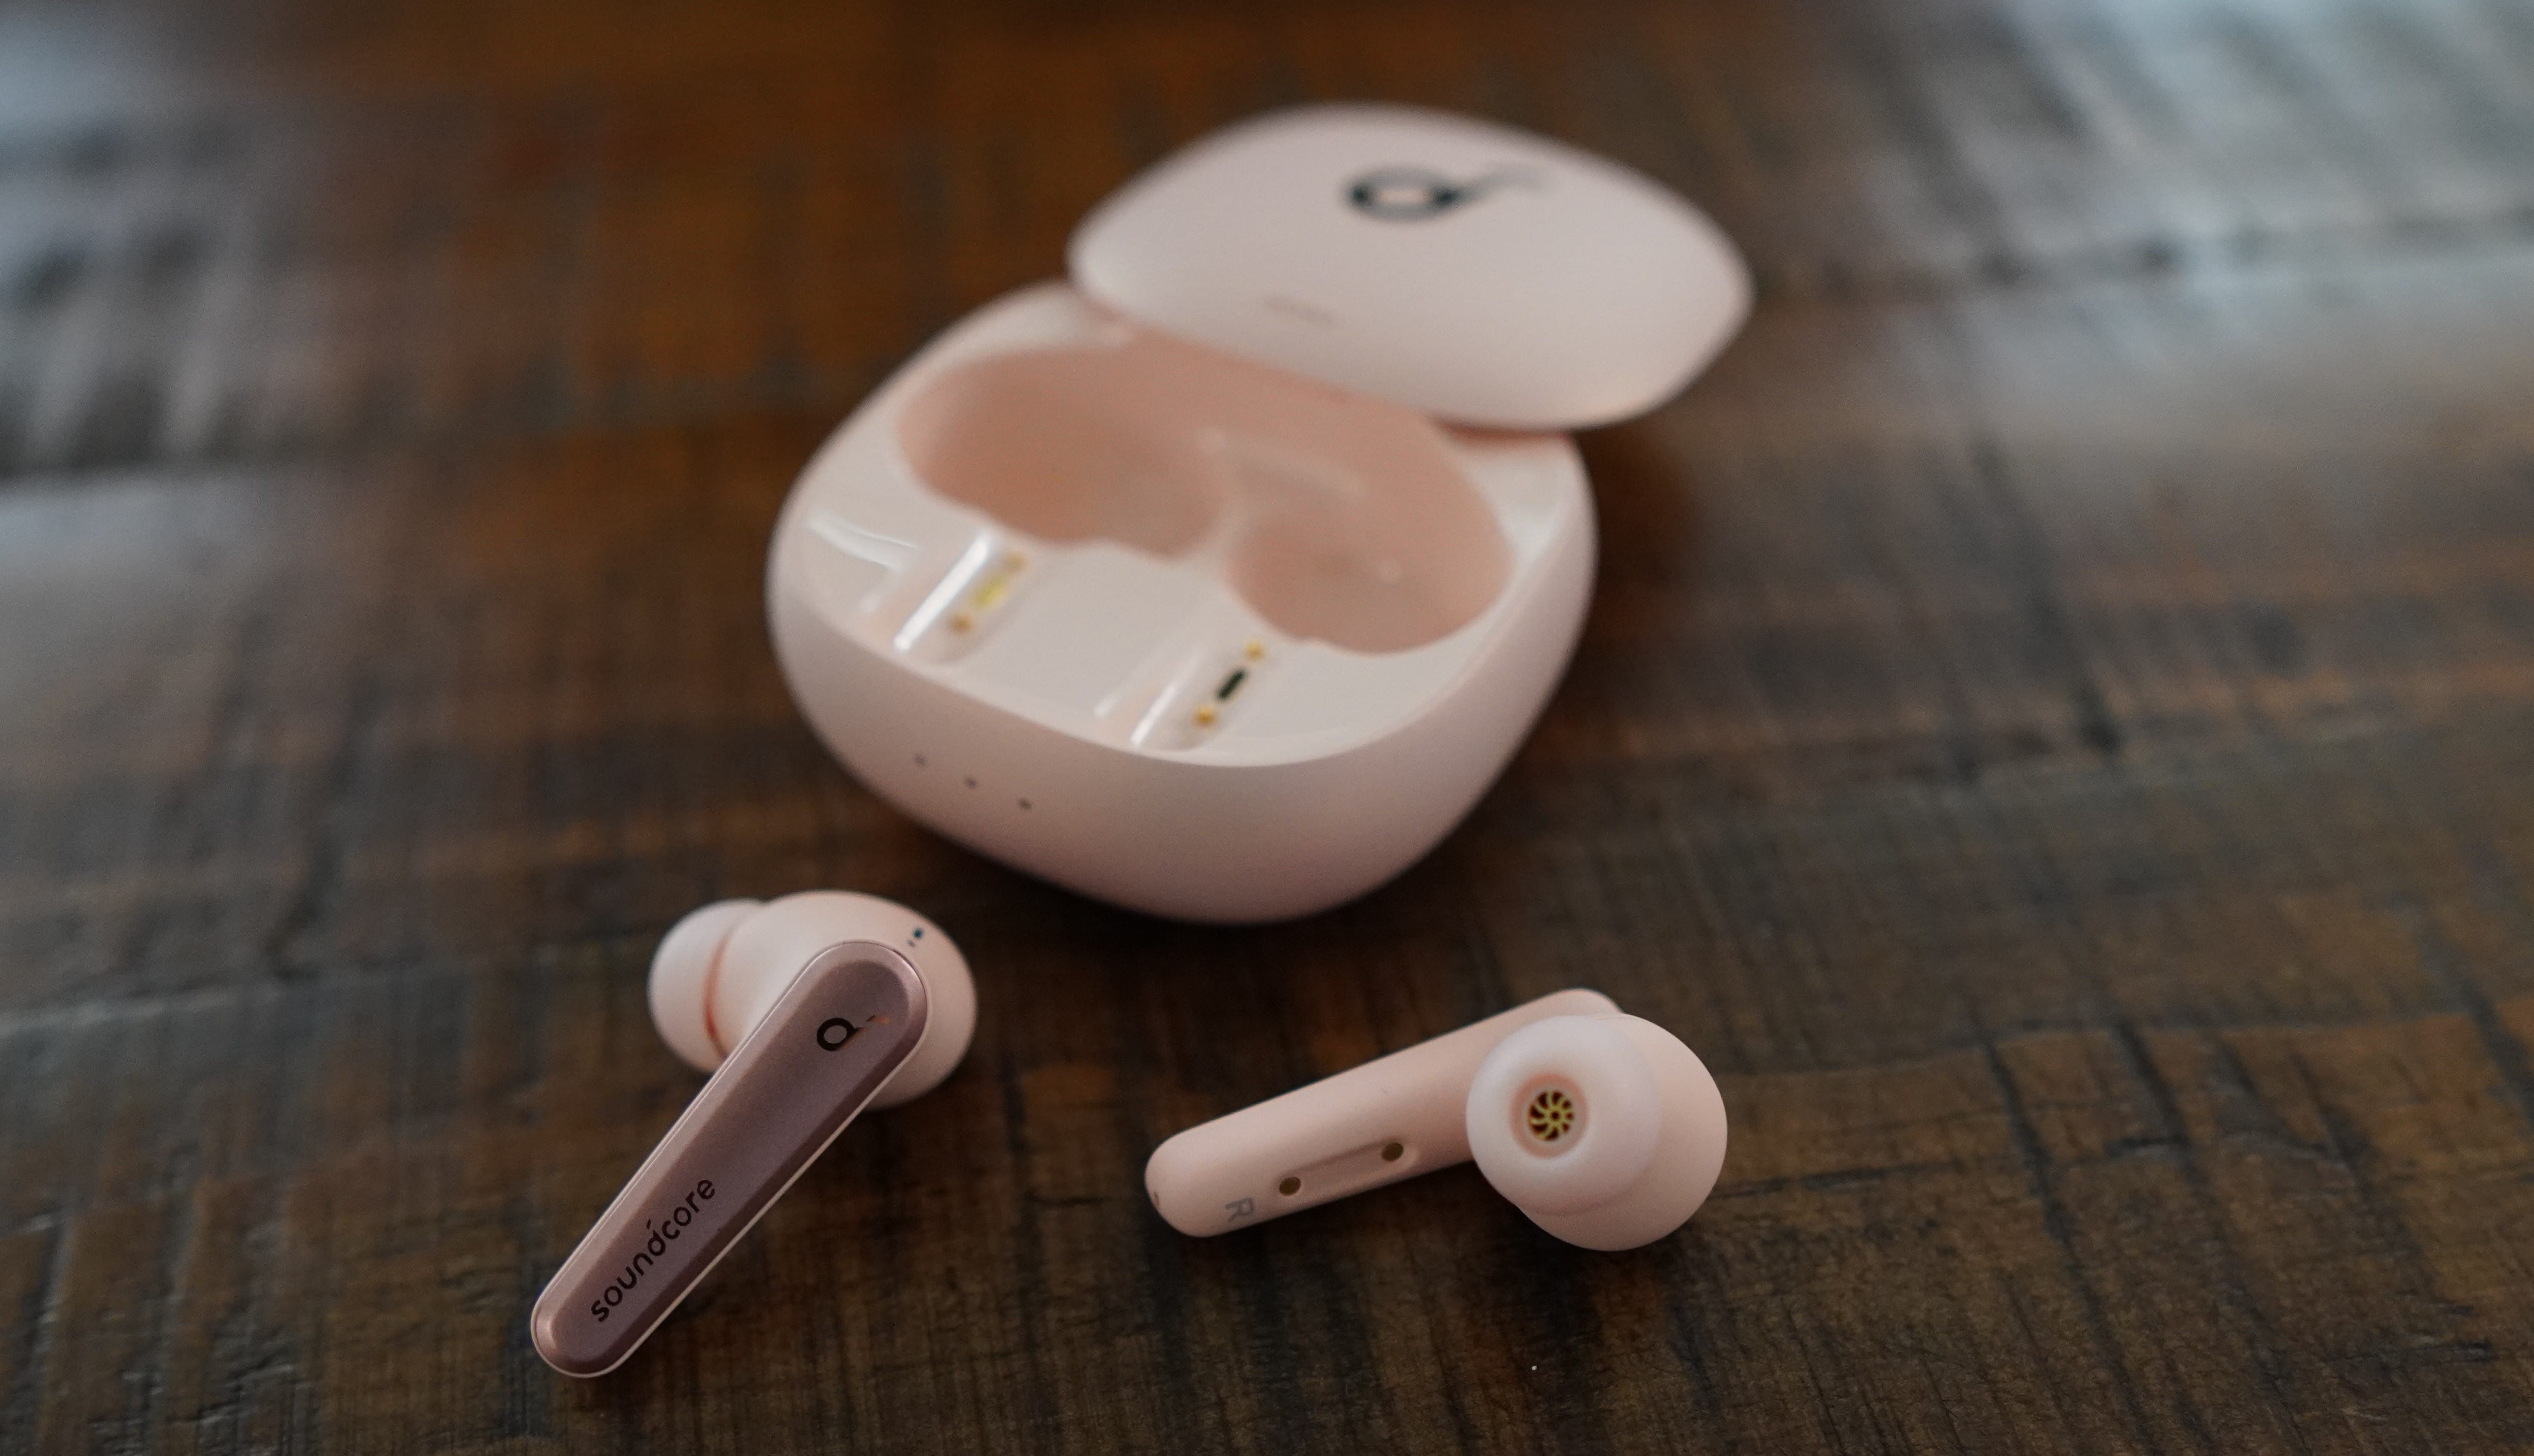 Anker Soundcore Liberty Air 2 Pro | A Great AirPods Replacement